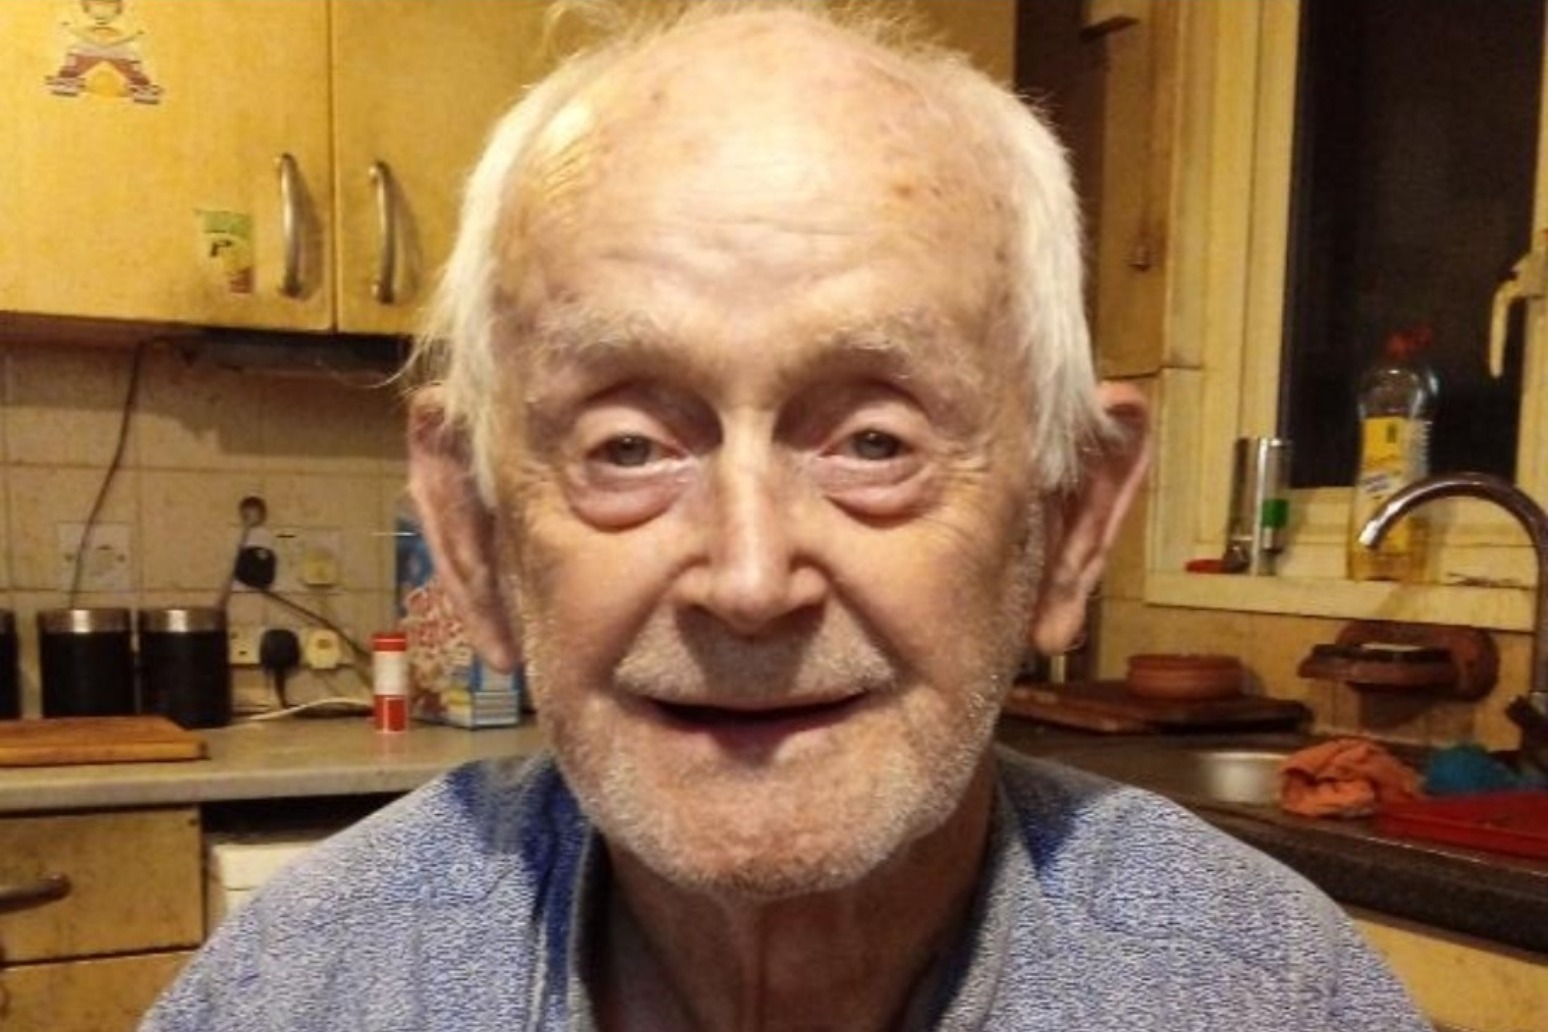 Arrest over fatal stabbing of 87-year-old on mobility scooter 